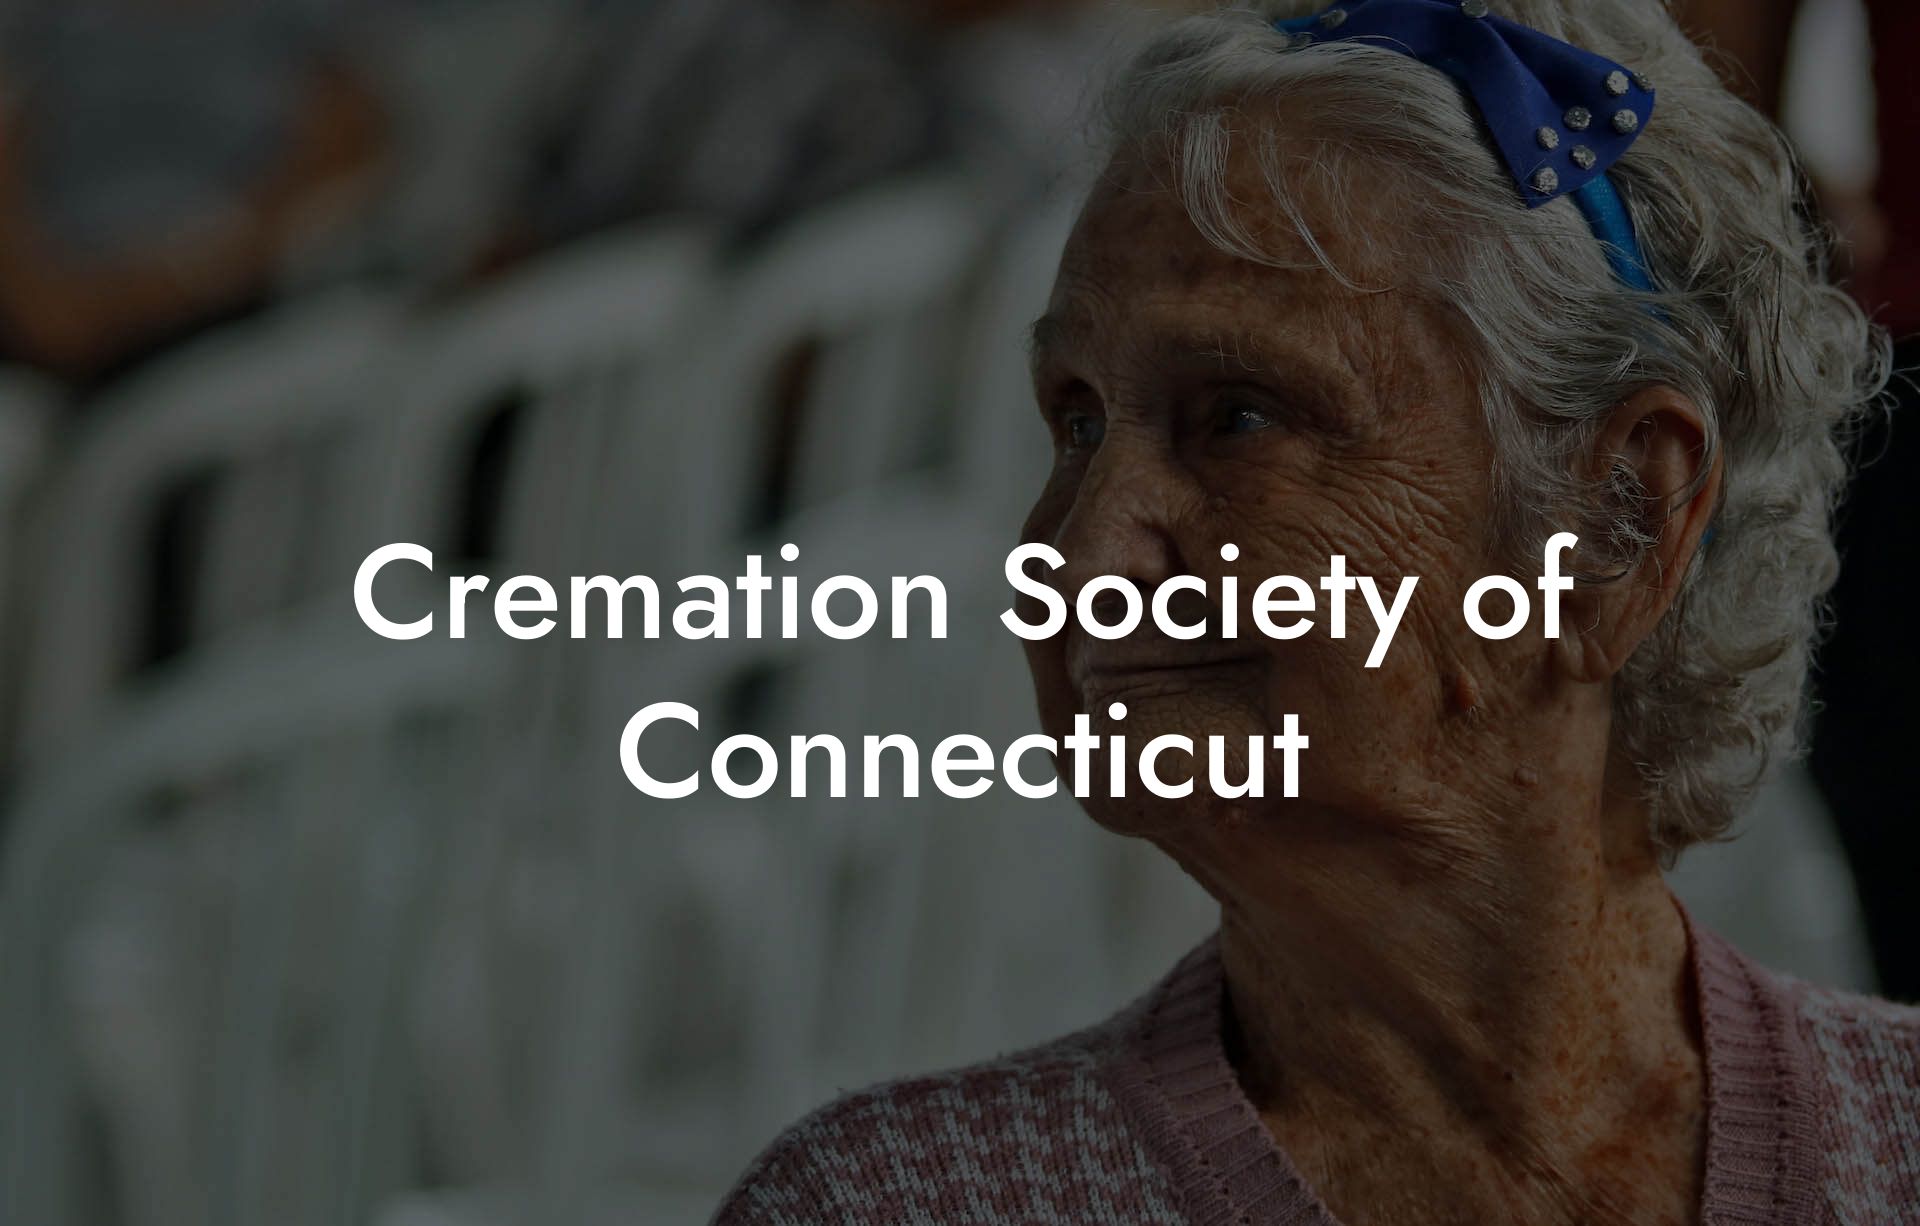 Cremation Society of Connecticut